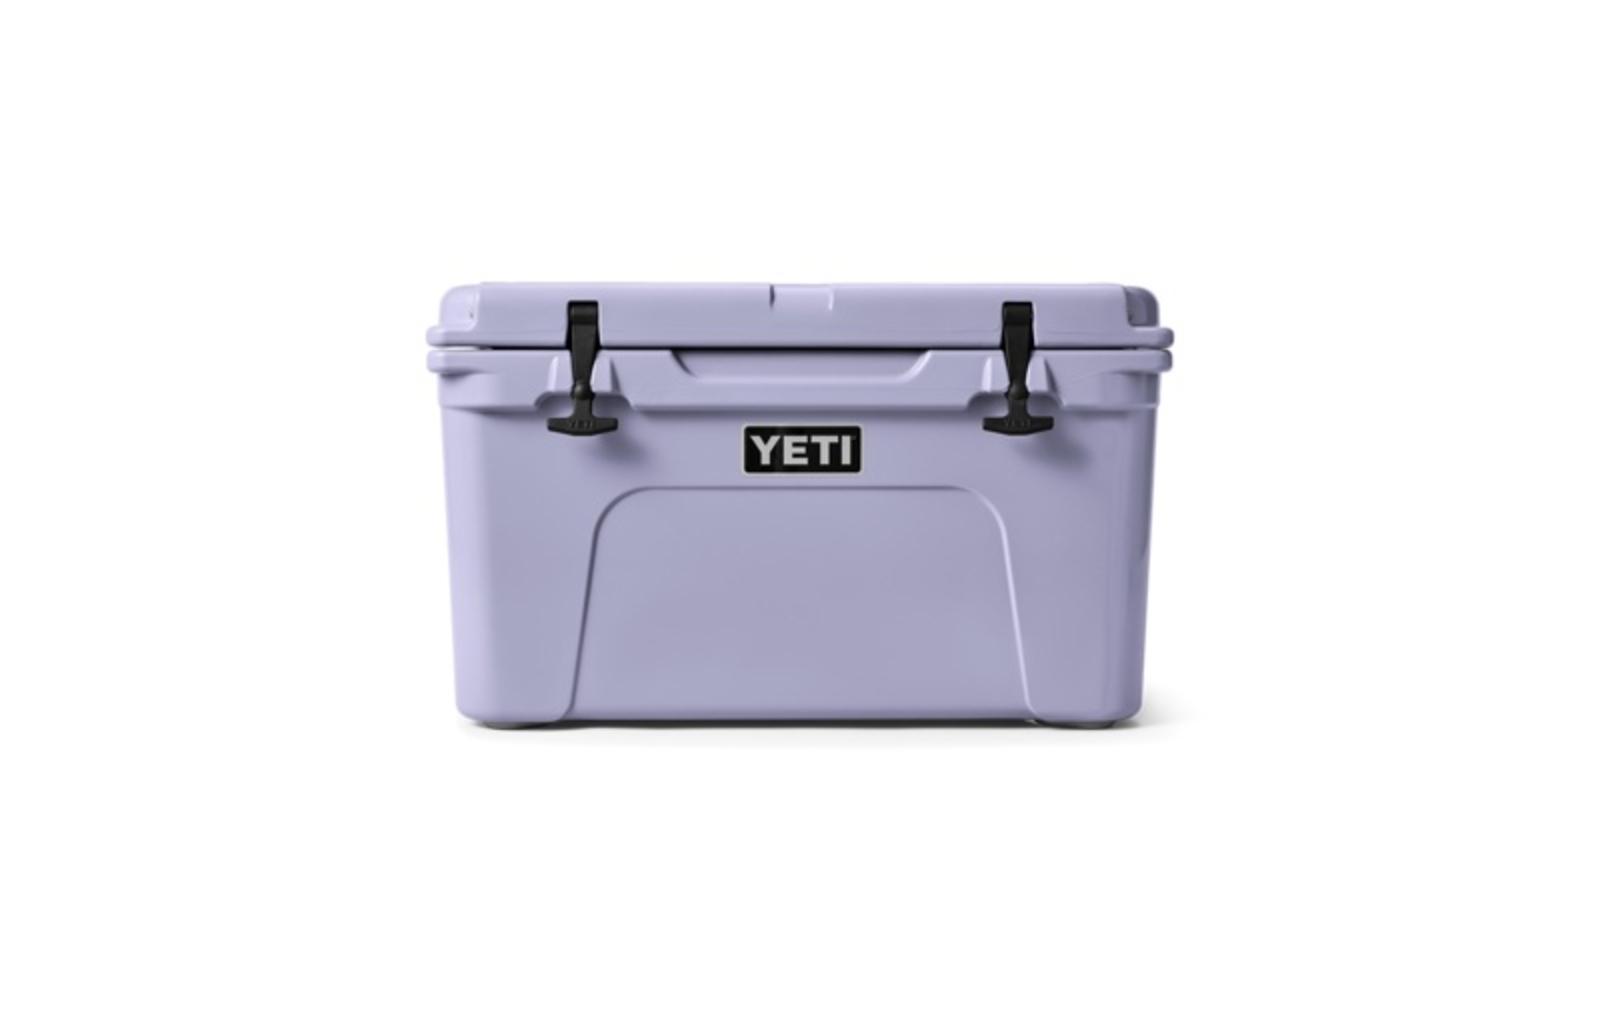 Yeti Tundra 45 Hard Cooler Cosmic Lilac Front VIEW